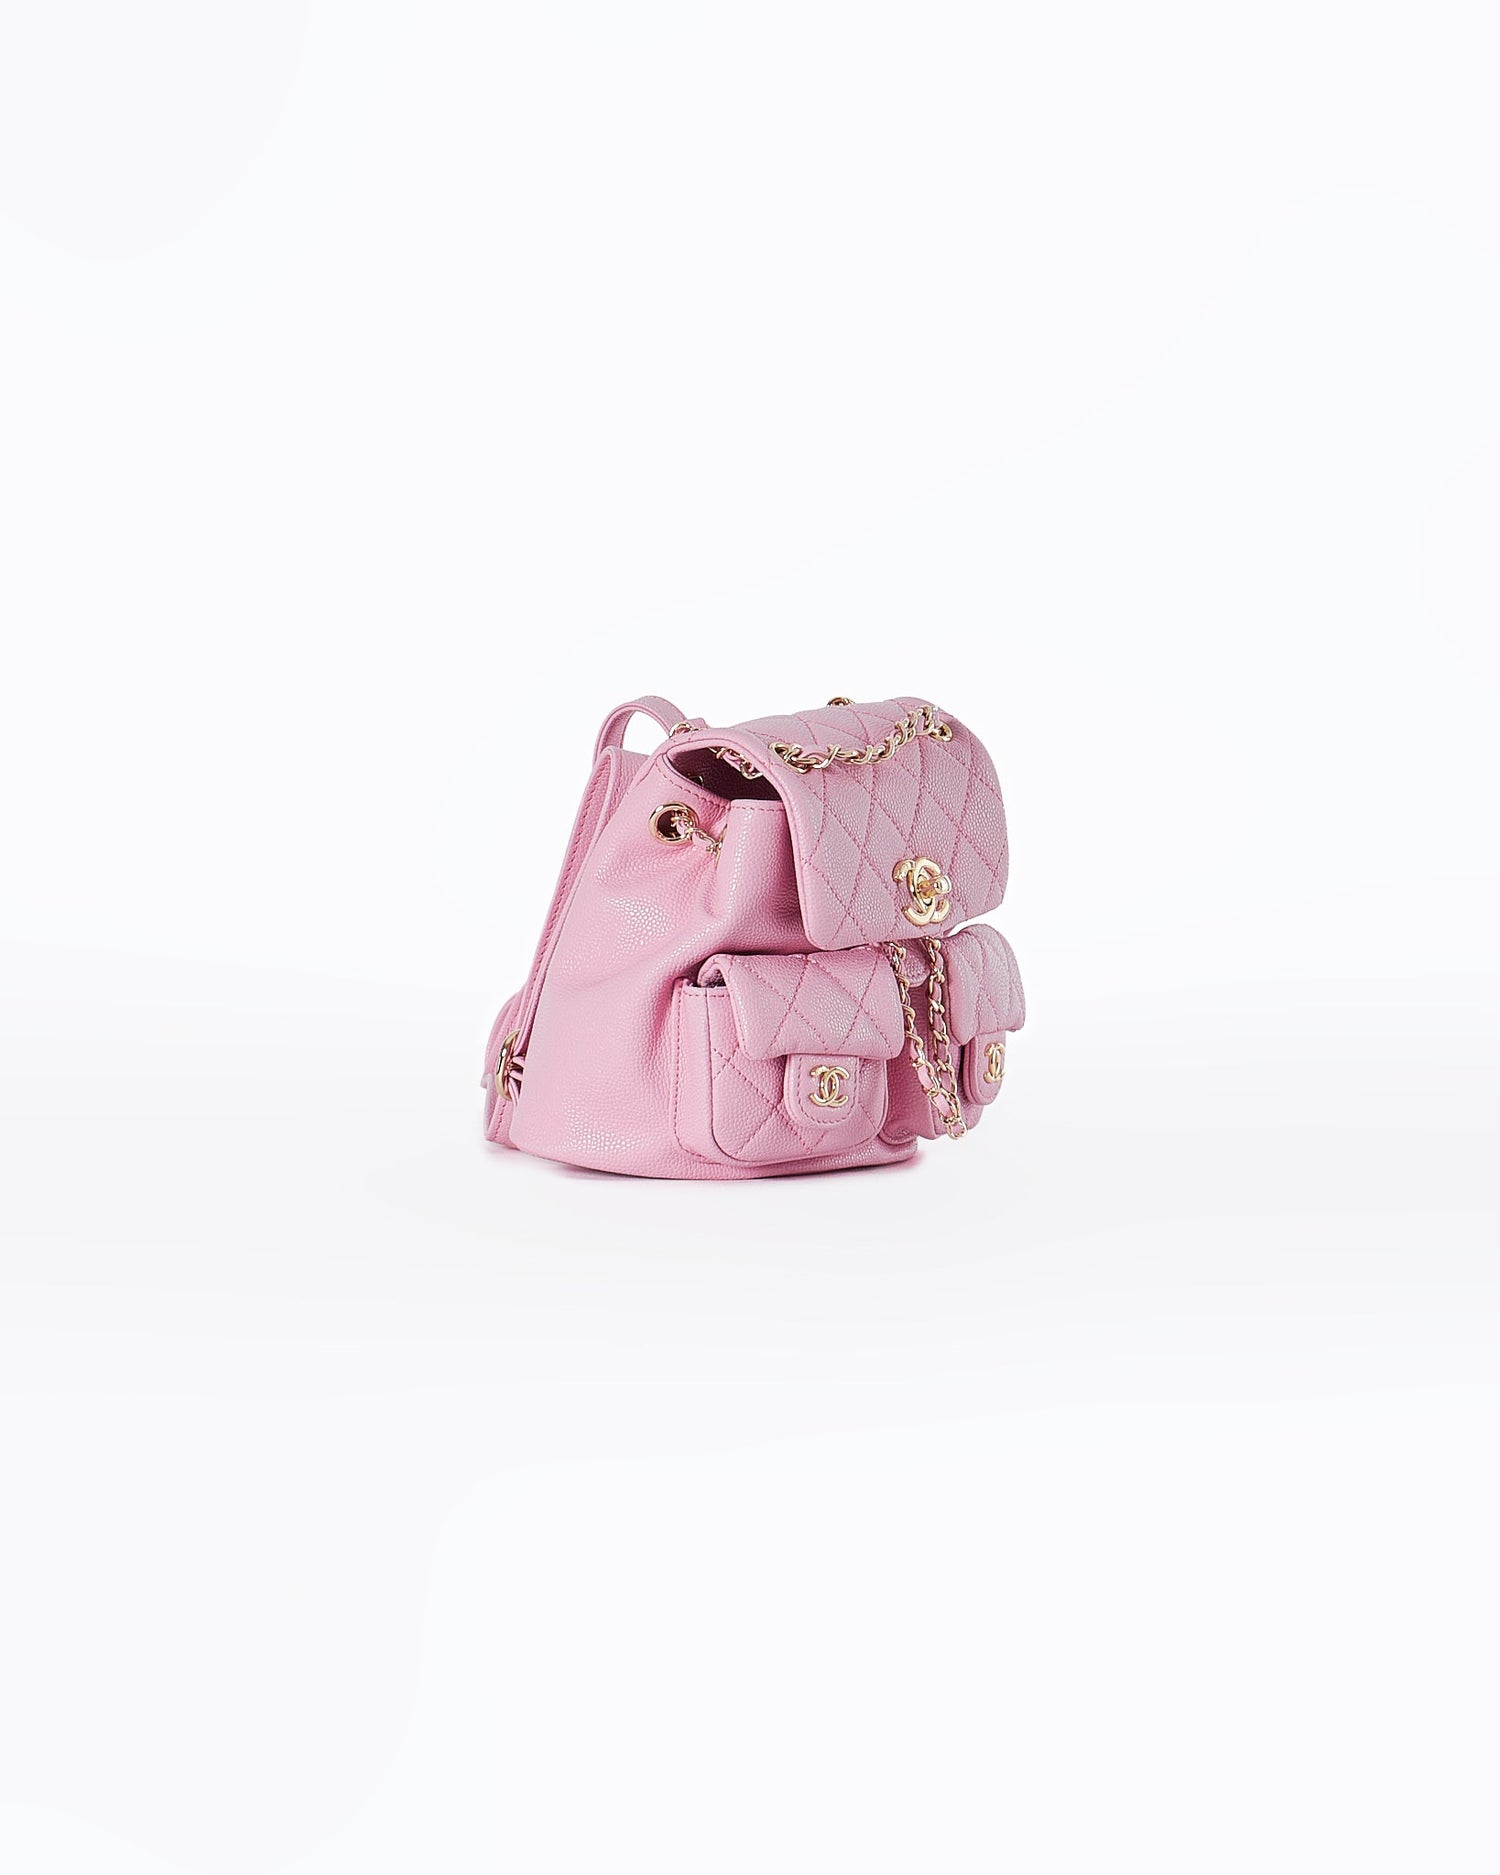 MOI OUTFIT-Chanel Lady Mini Backpack 279